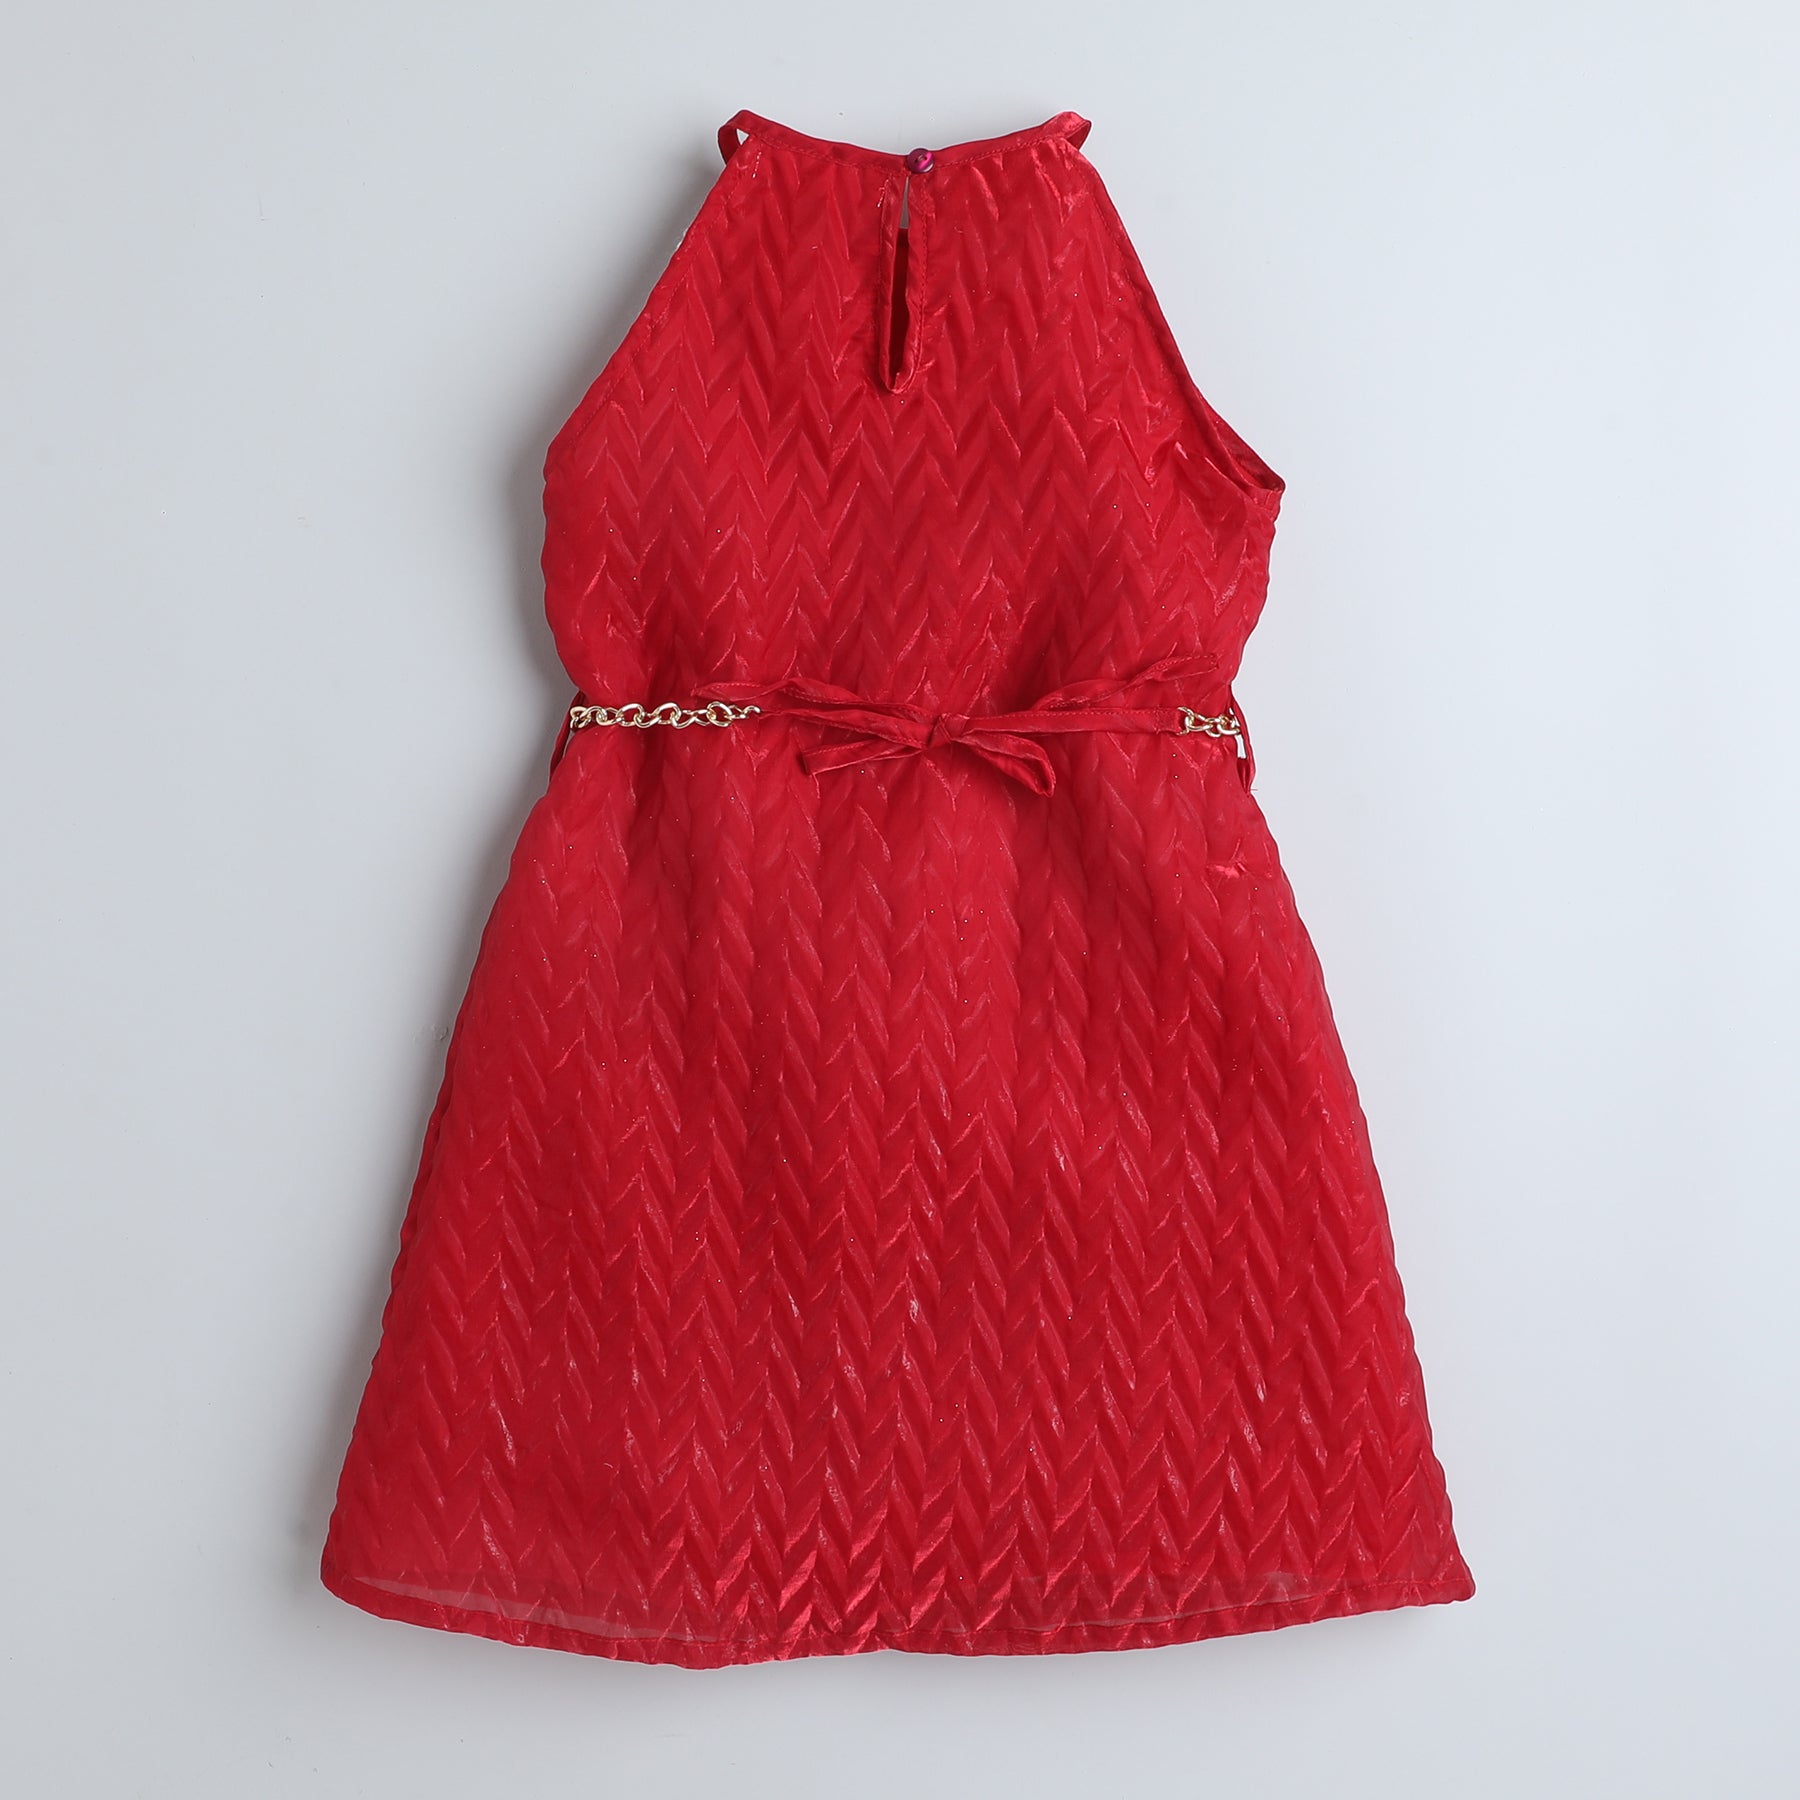 Taffykids Organza pleated Halter neck A-line party Dress with Chain belt-Red